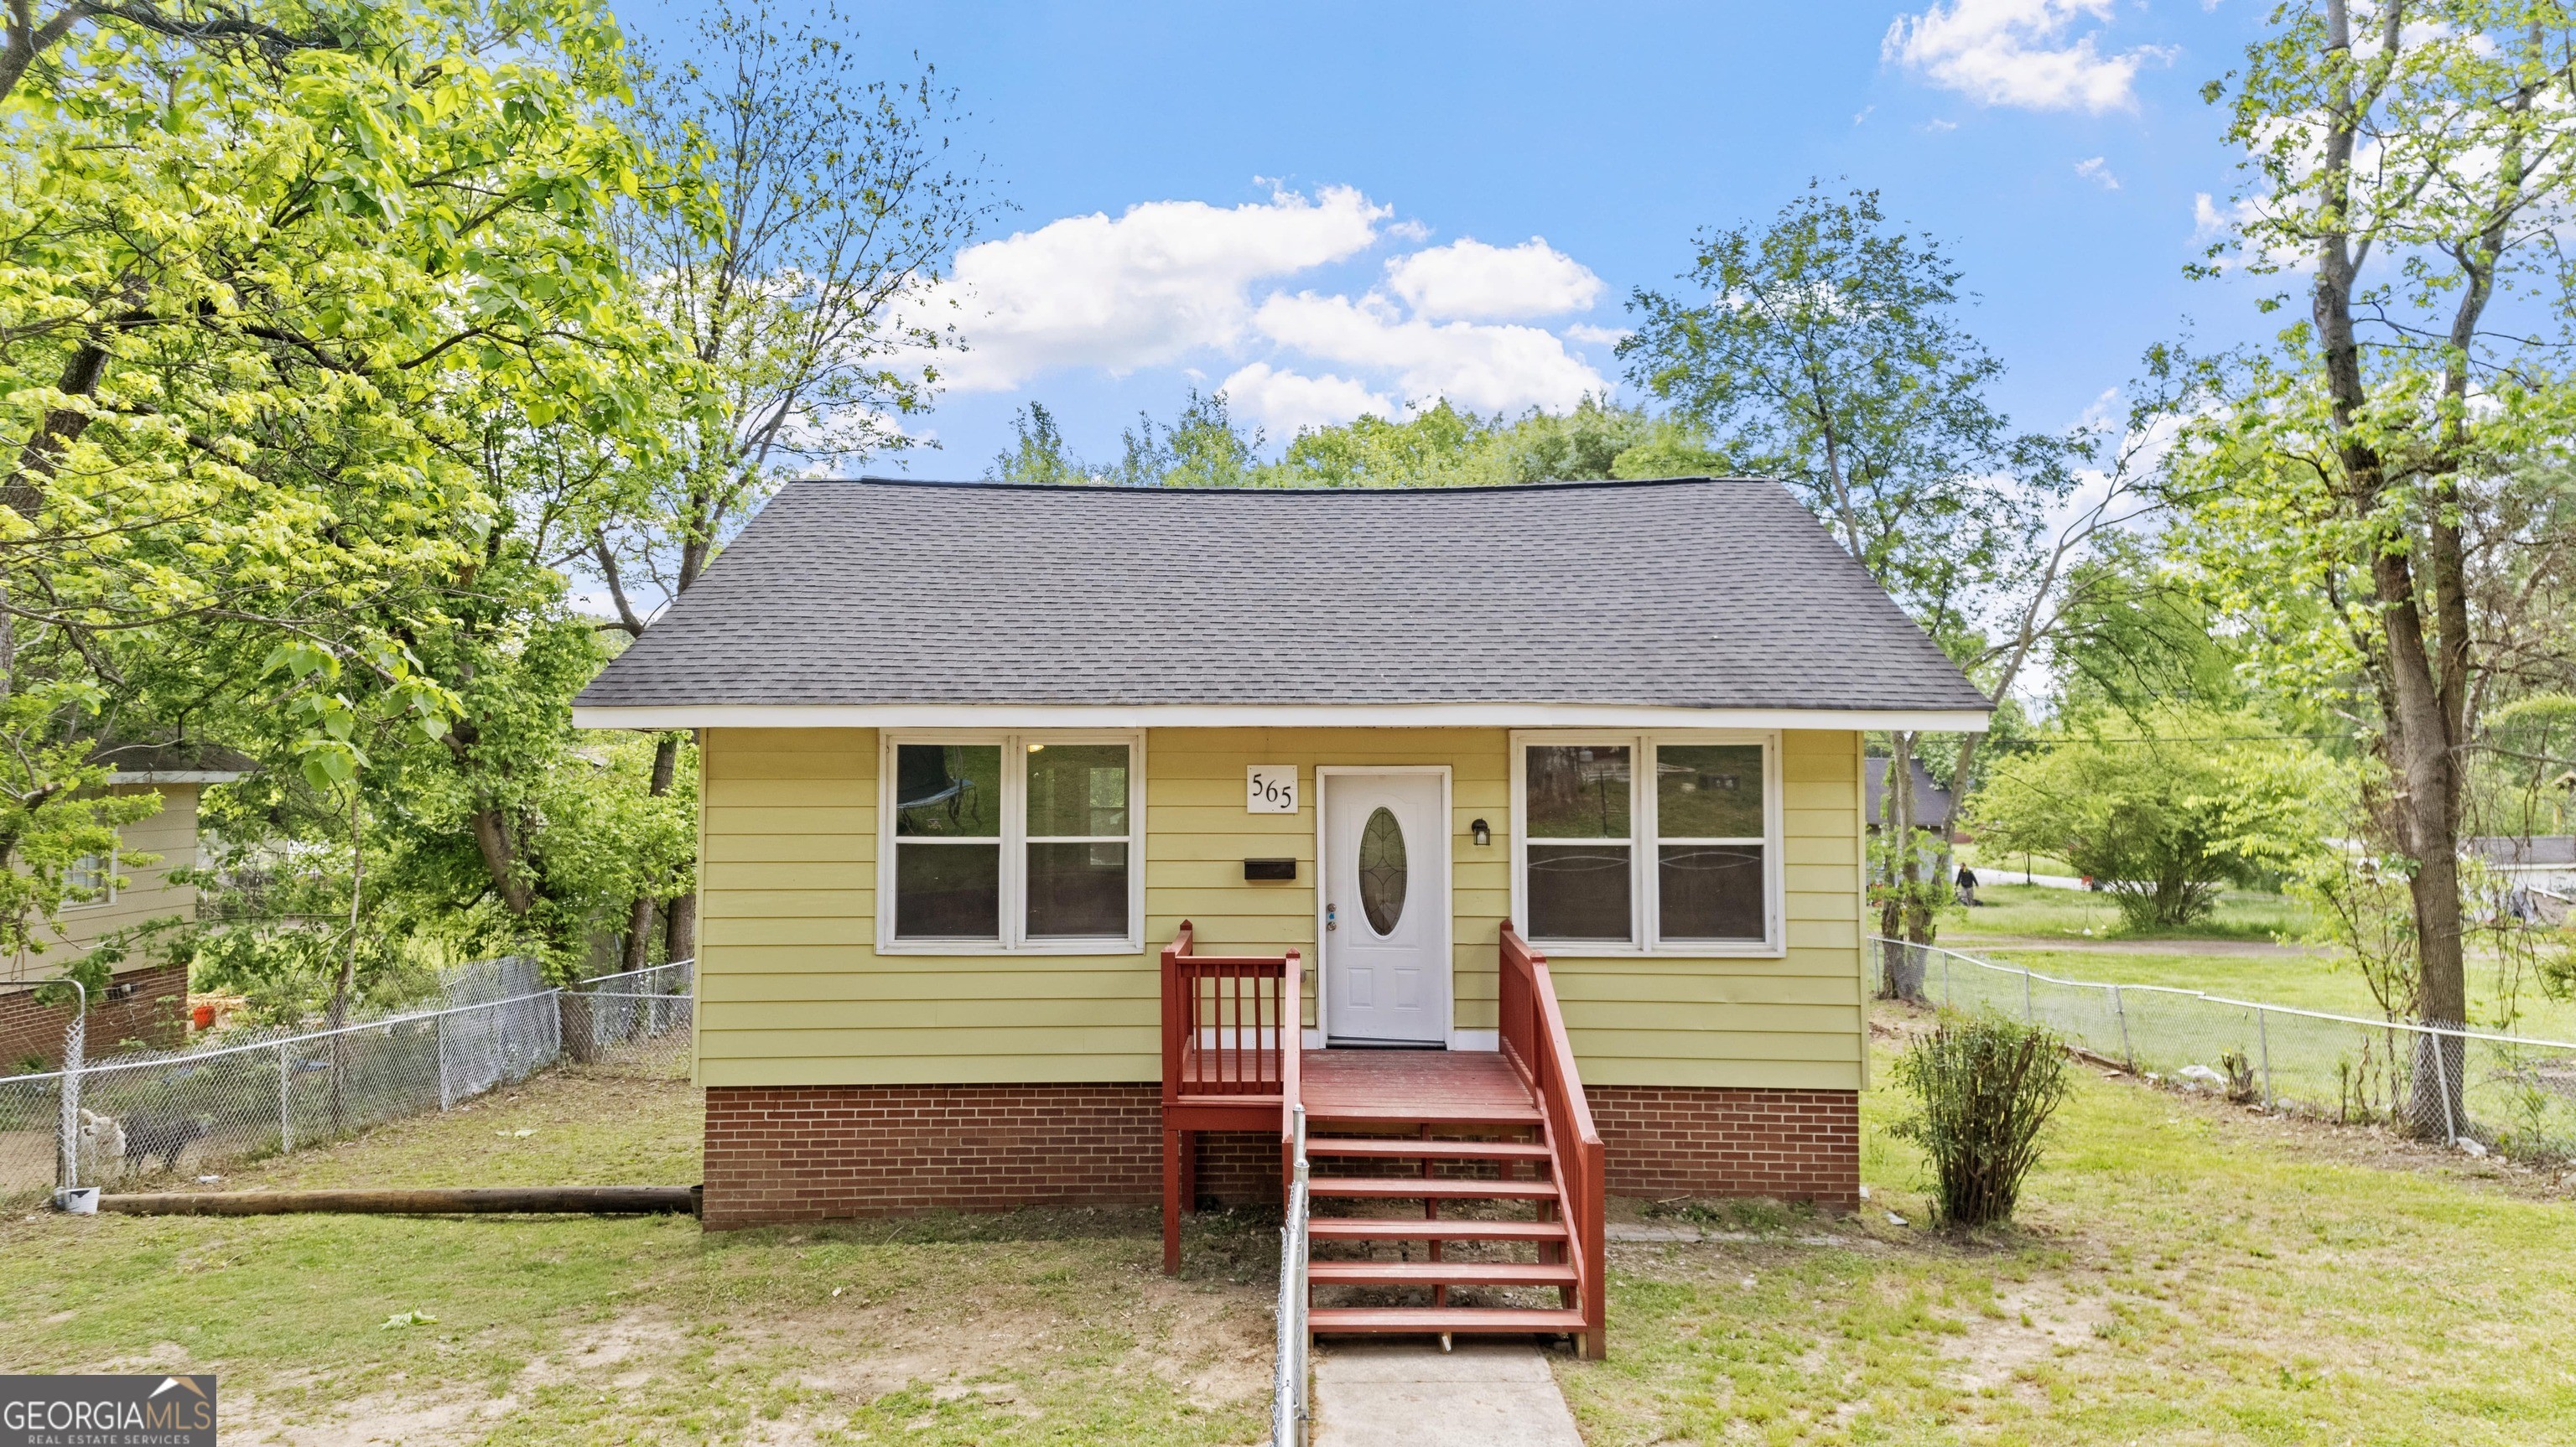 1. 565 3rd - Shannon St